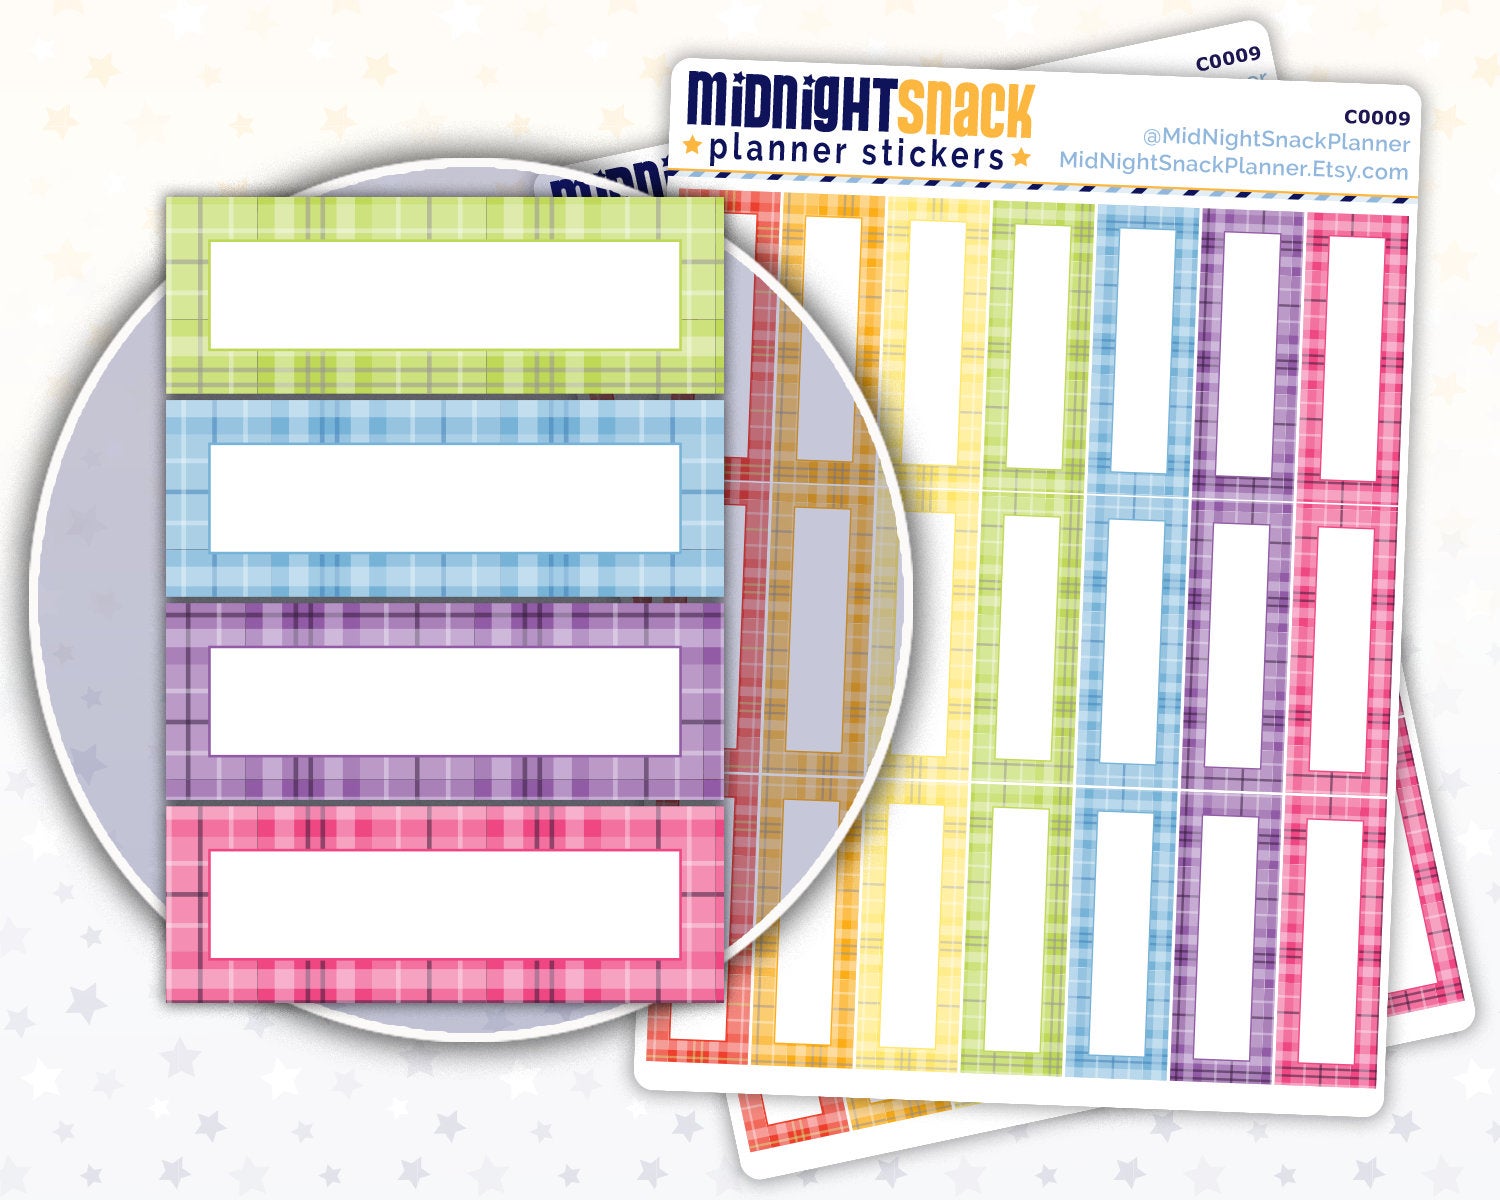 Plaid Patterned Quarter Boxes Planner Sticker from Midnight Snack Planner